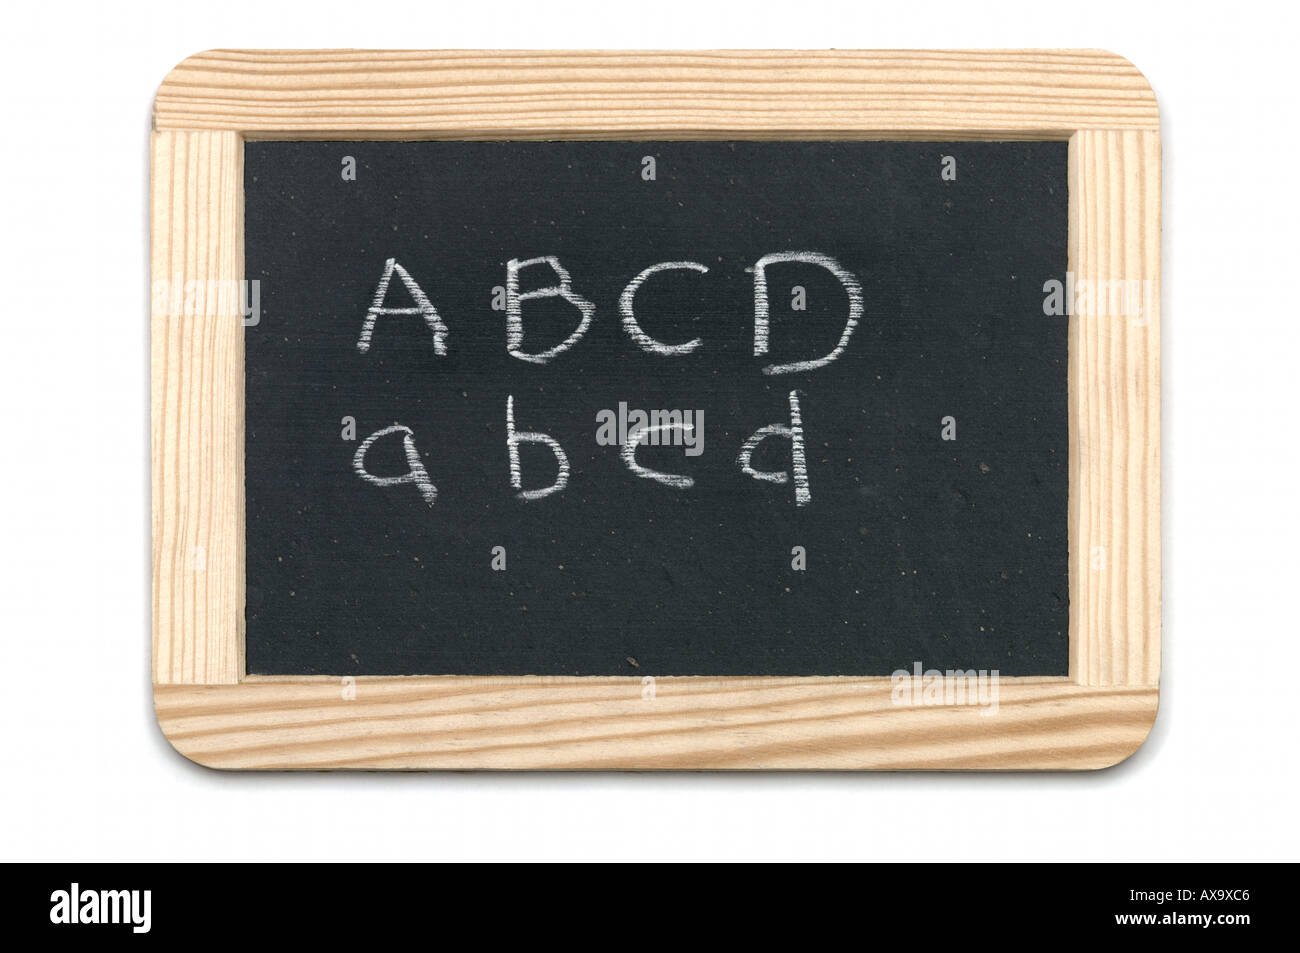 A B C D small and capital letters on traditional writing slate in wooden frame on white background Stock Photo